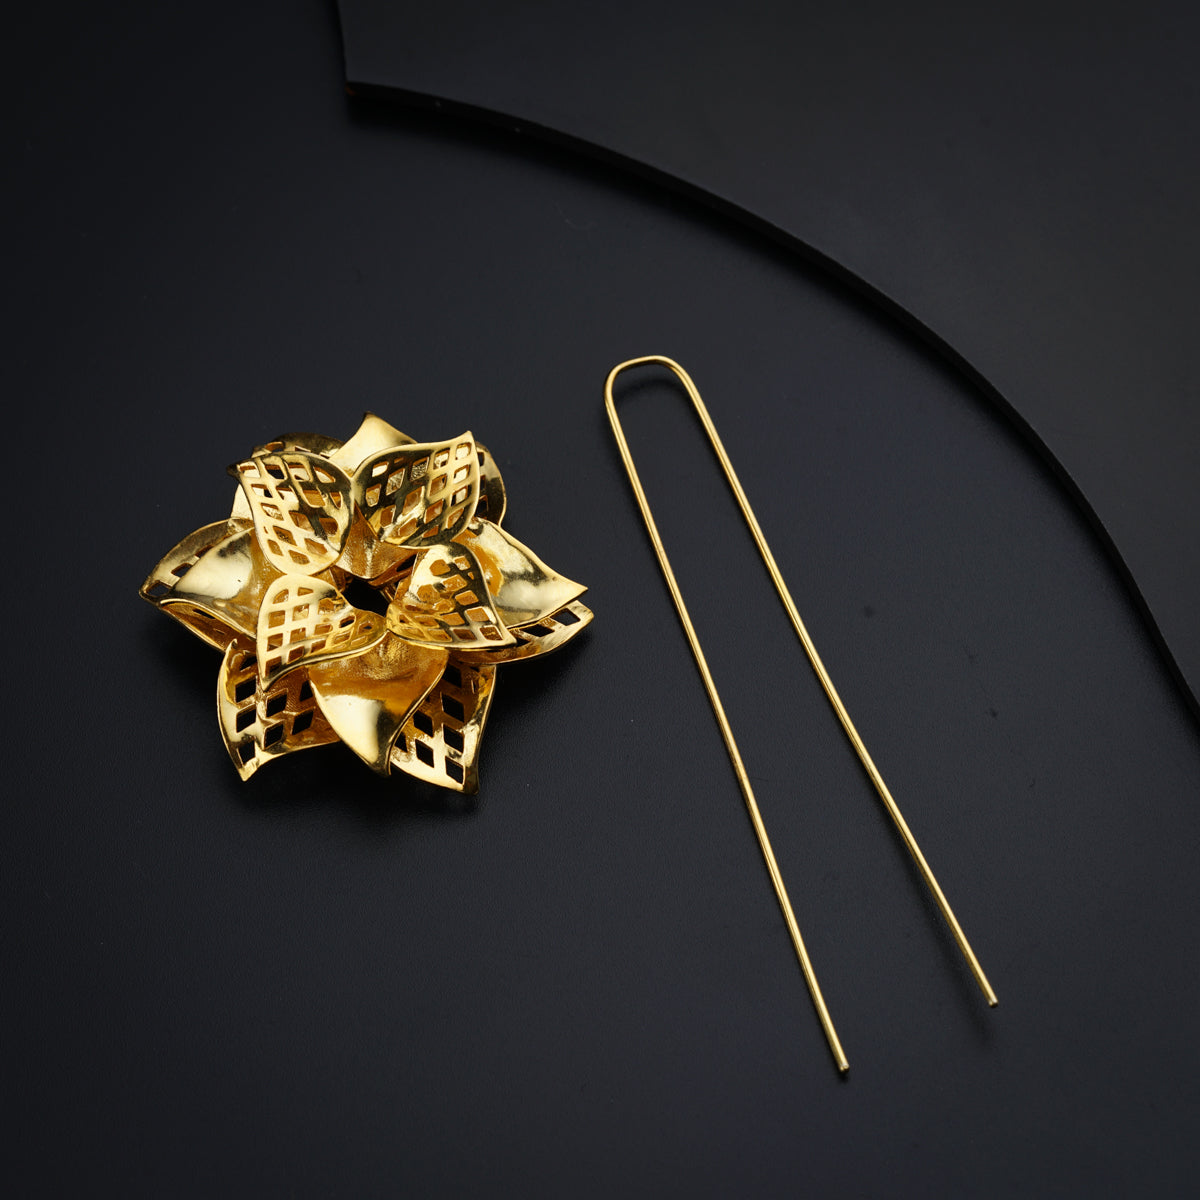 a pair of gold - plated metal hair pins and a gold - plated